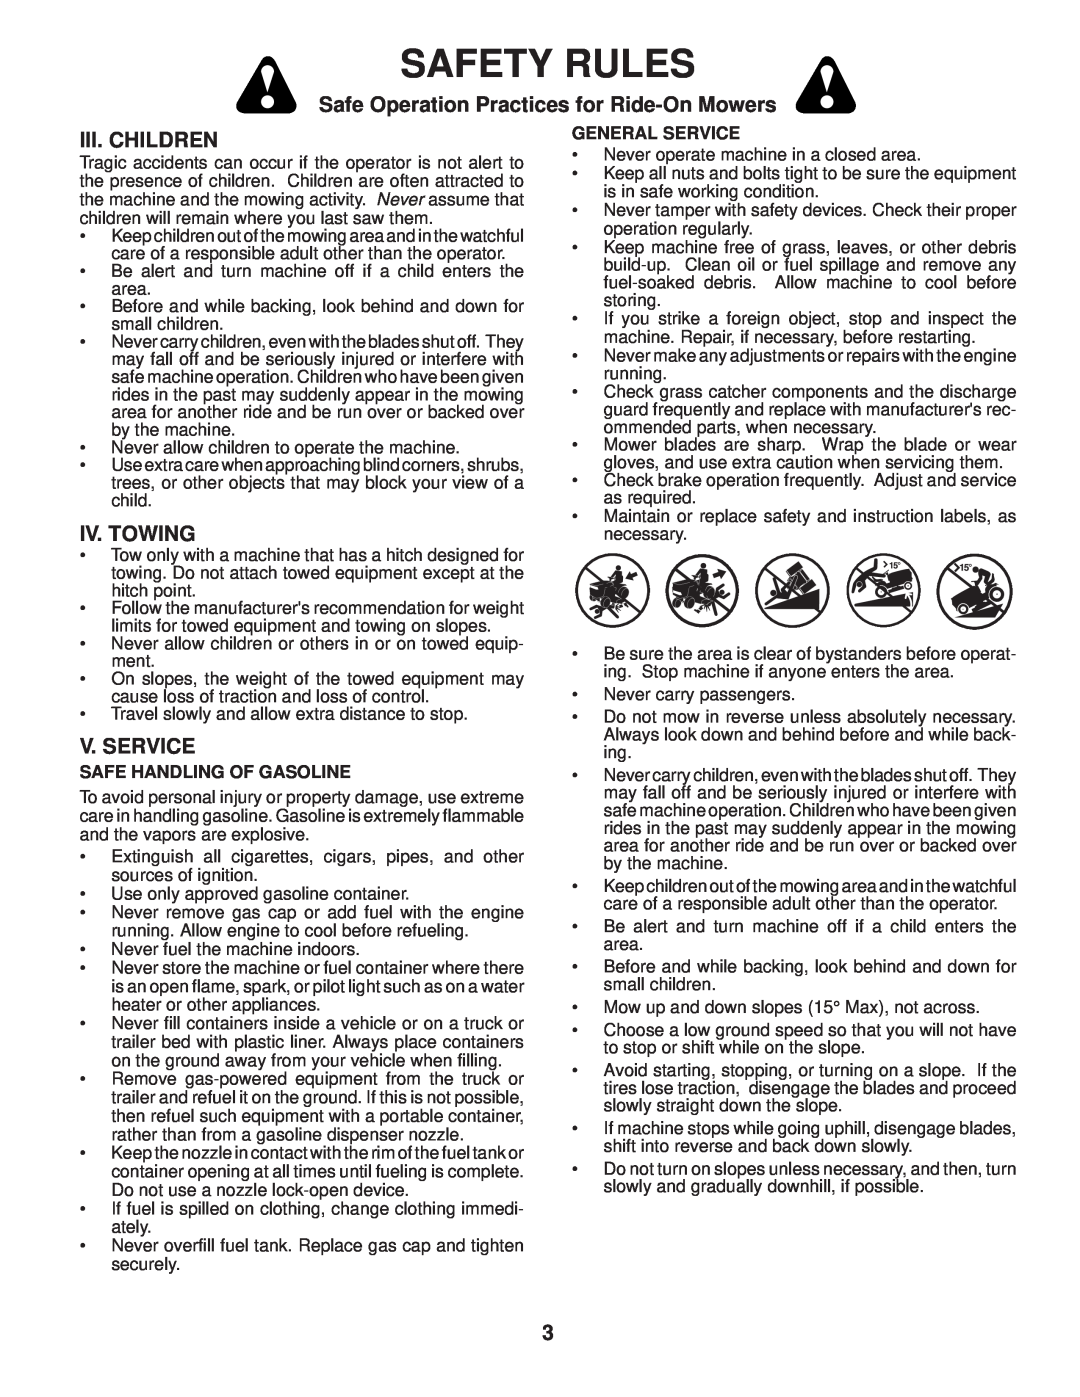 Husqvarna 2754 GLS manual Iii. Children, Iv. Towing, V. Service, Safety Rules, Safe Operation Practices for Ride-On Mowers 